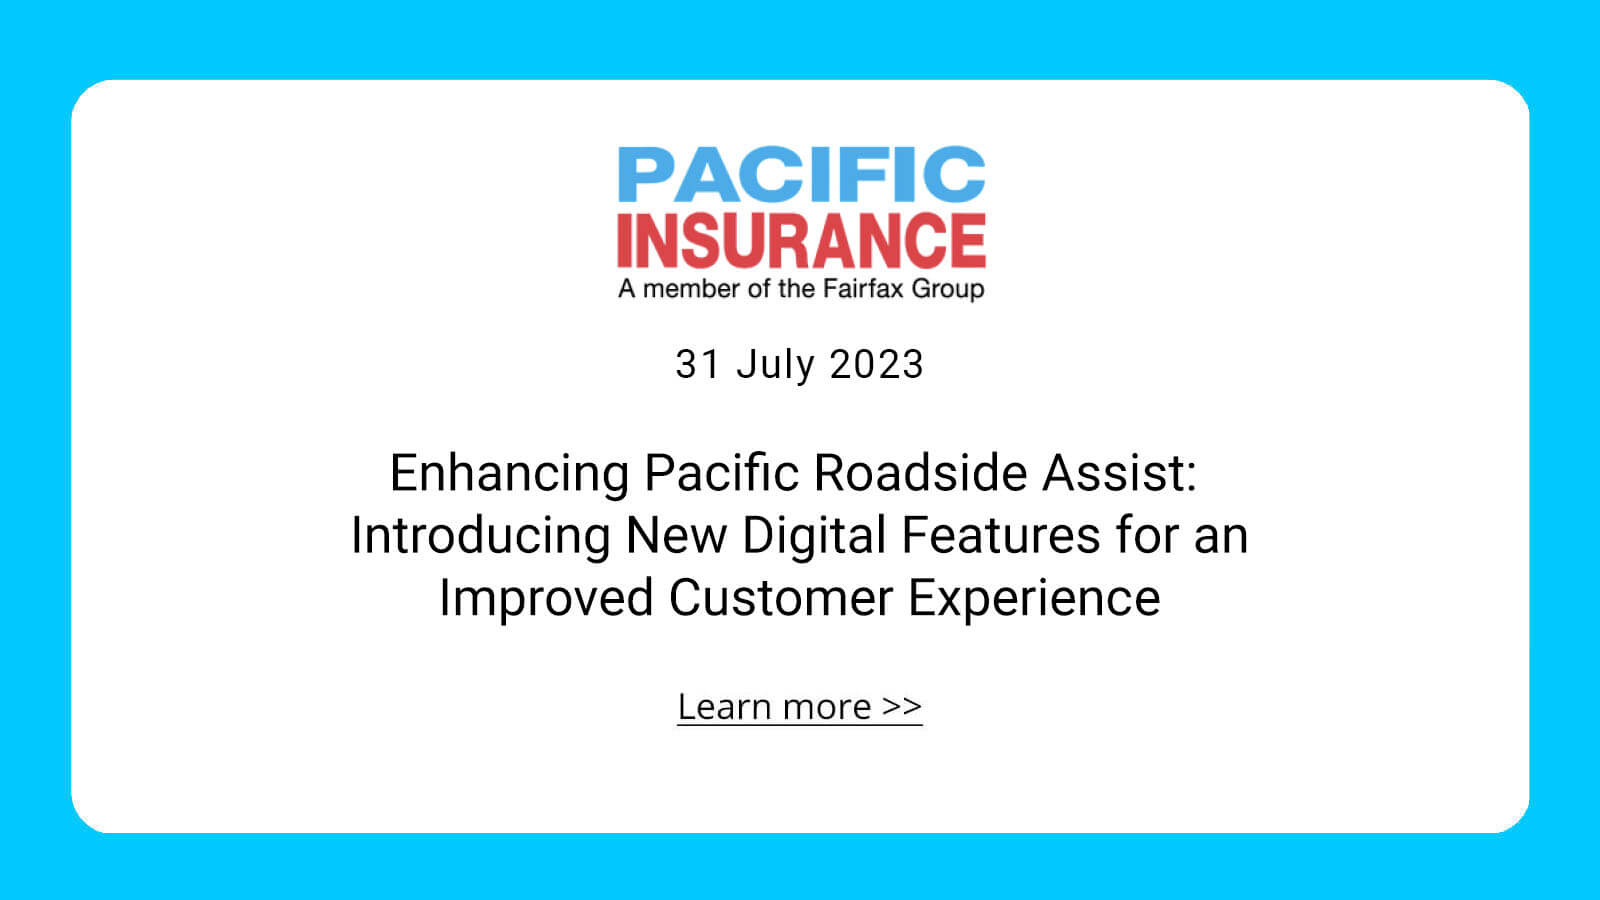 Enhancing Pacific Roadside Assist: Introducing New Digital Features for an Improved Customer Experience